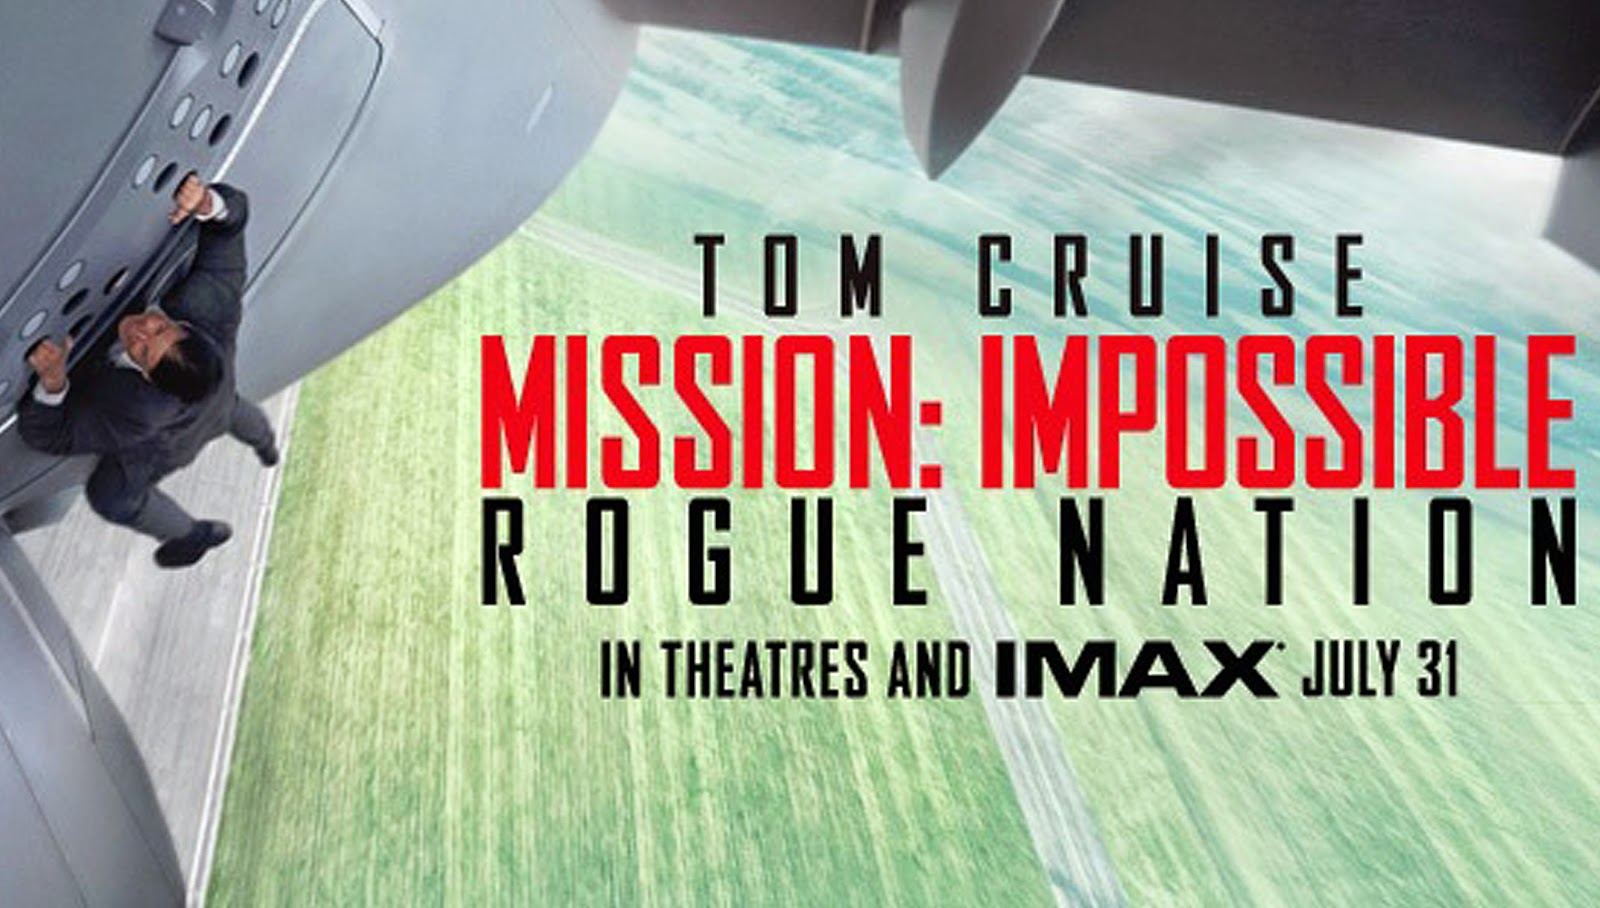 Mission Impossible rogue nation